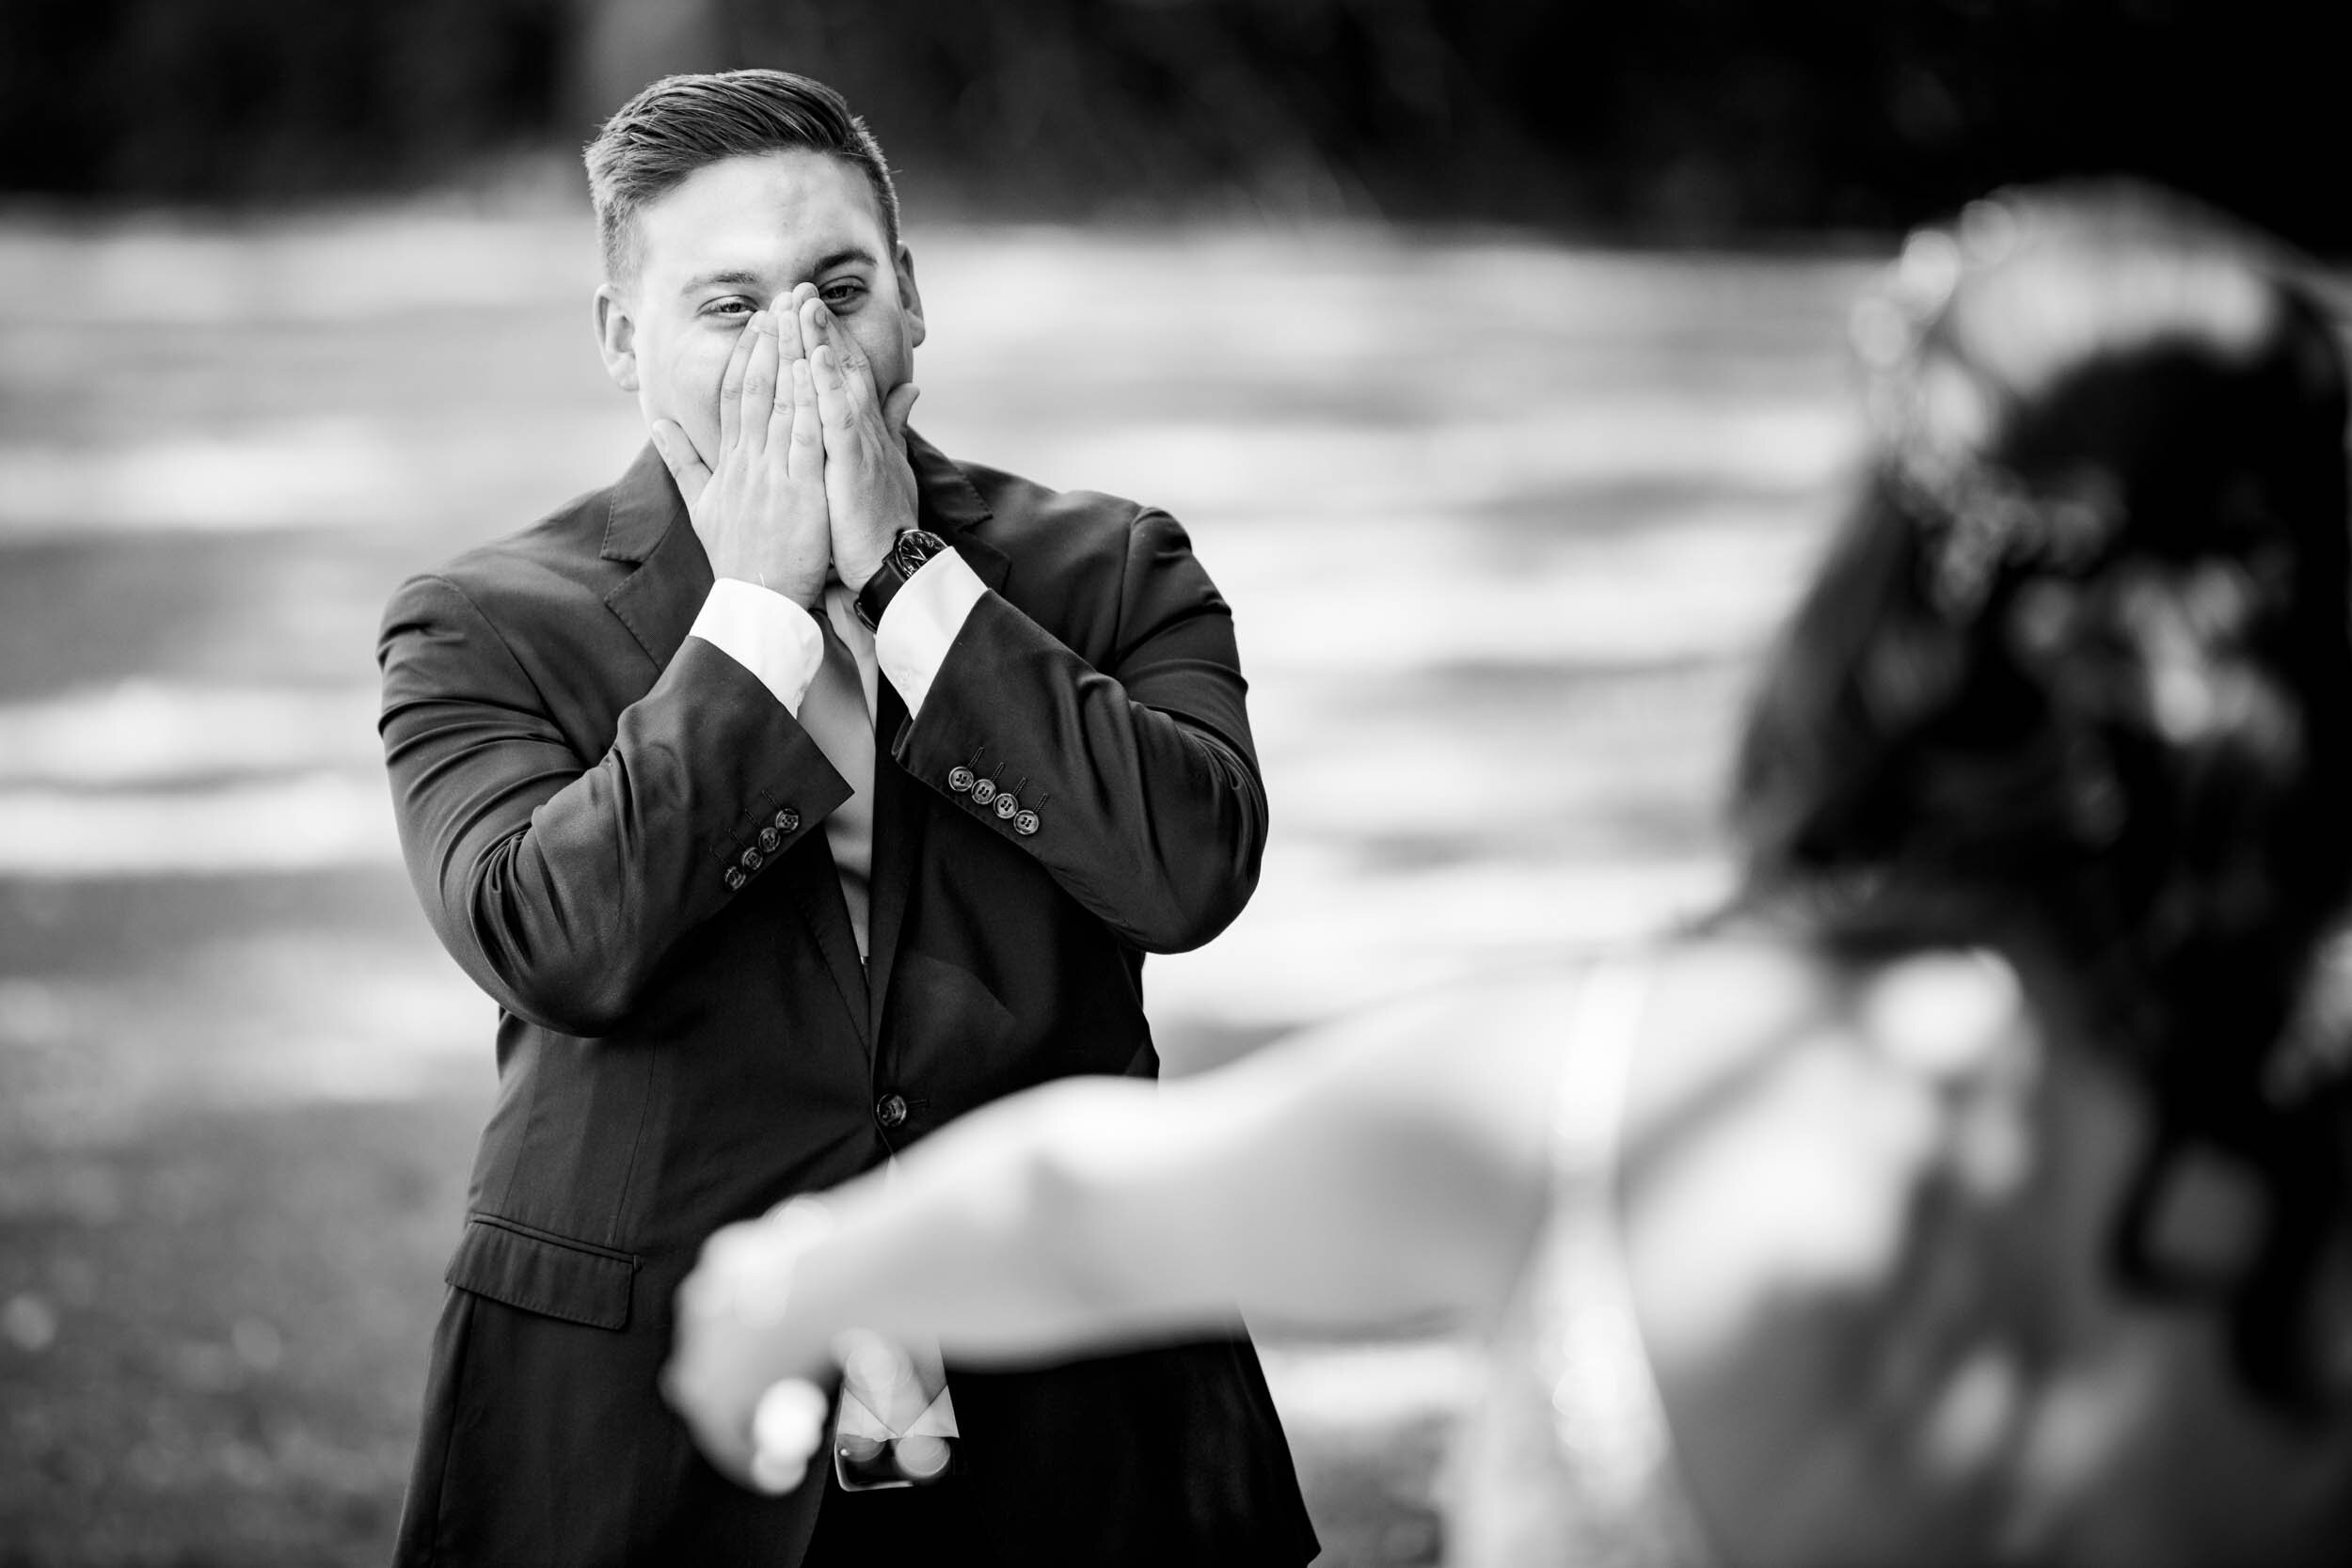 Groom gets emotional during the first look on the wedding day:  Chicago backyard wedding photographed by J. Brown Photography.